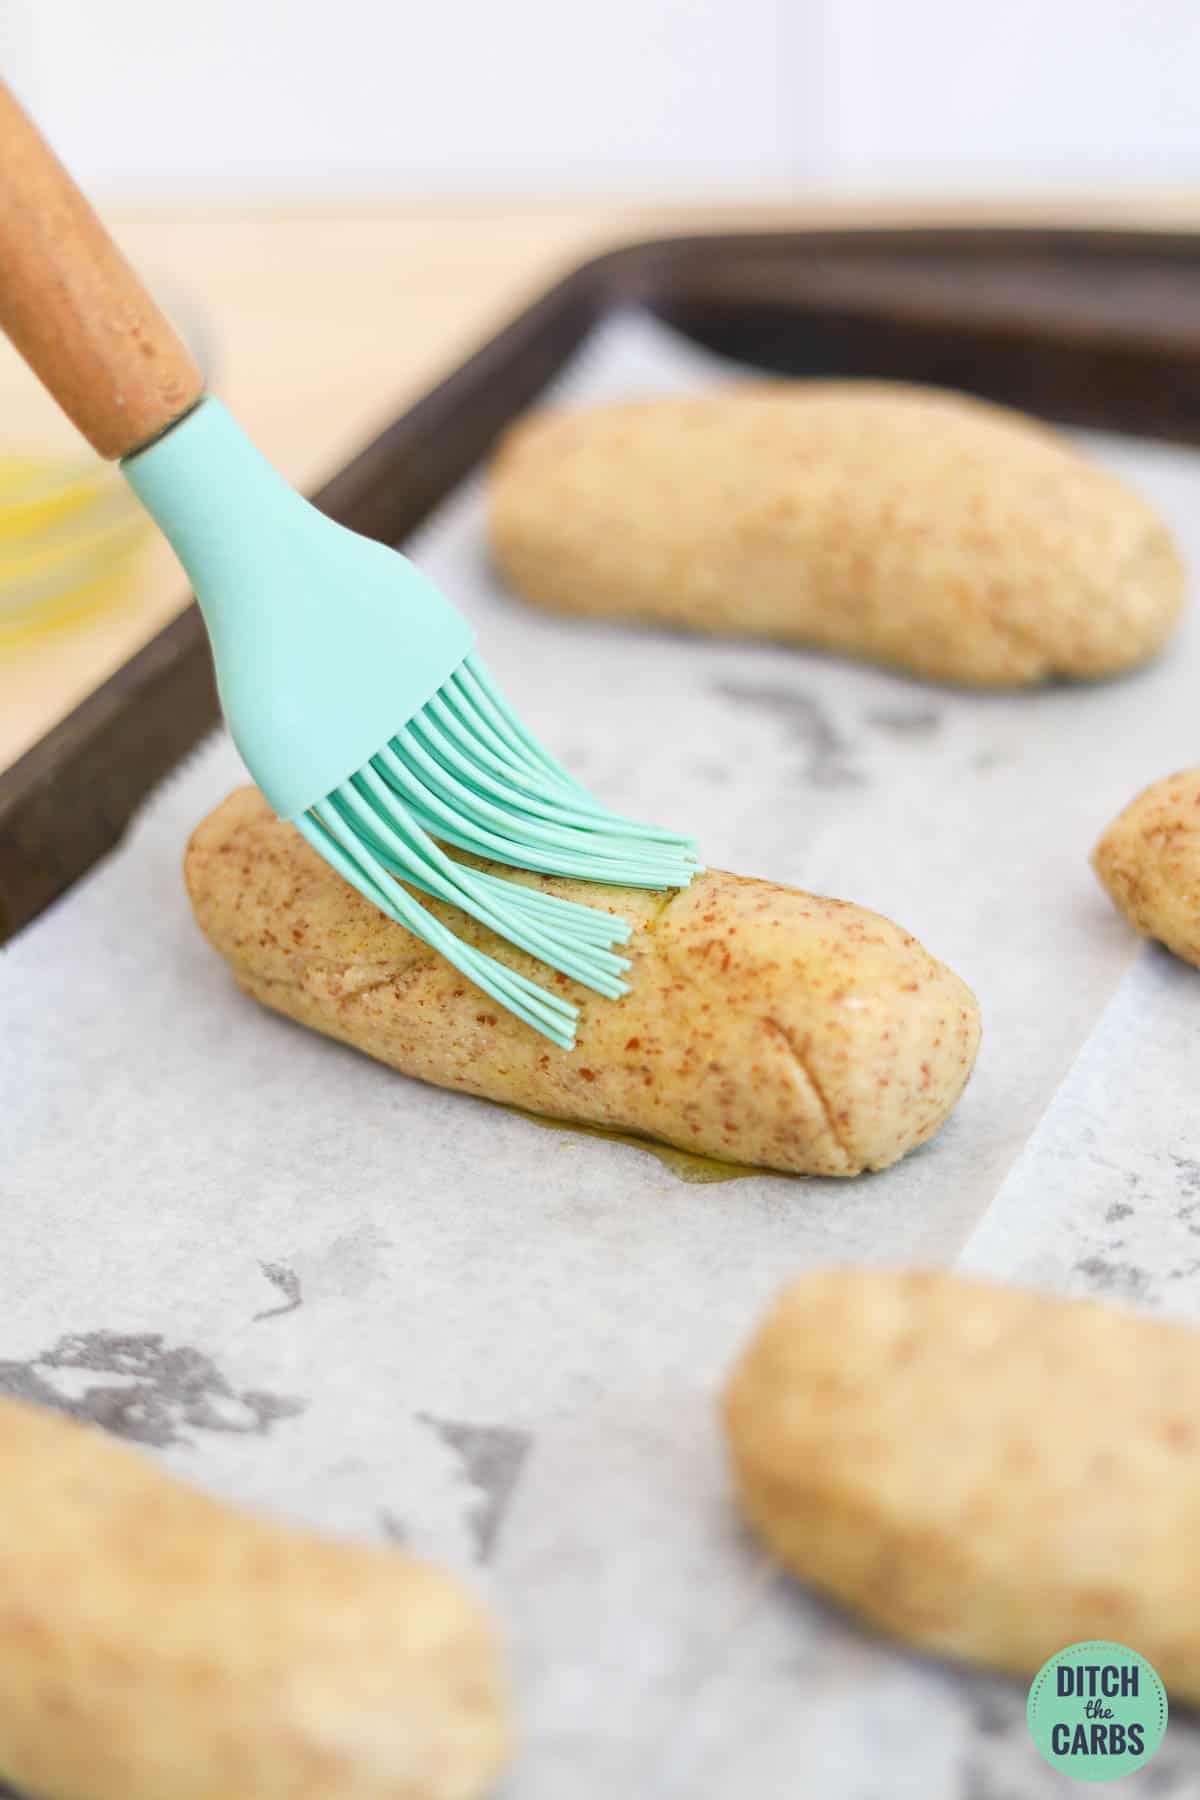 A basting brush is spread olive oil over a shaped keto hot dog bun on a lined baking tray before baking.